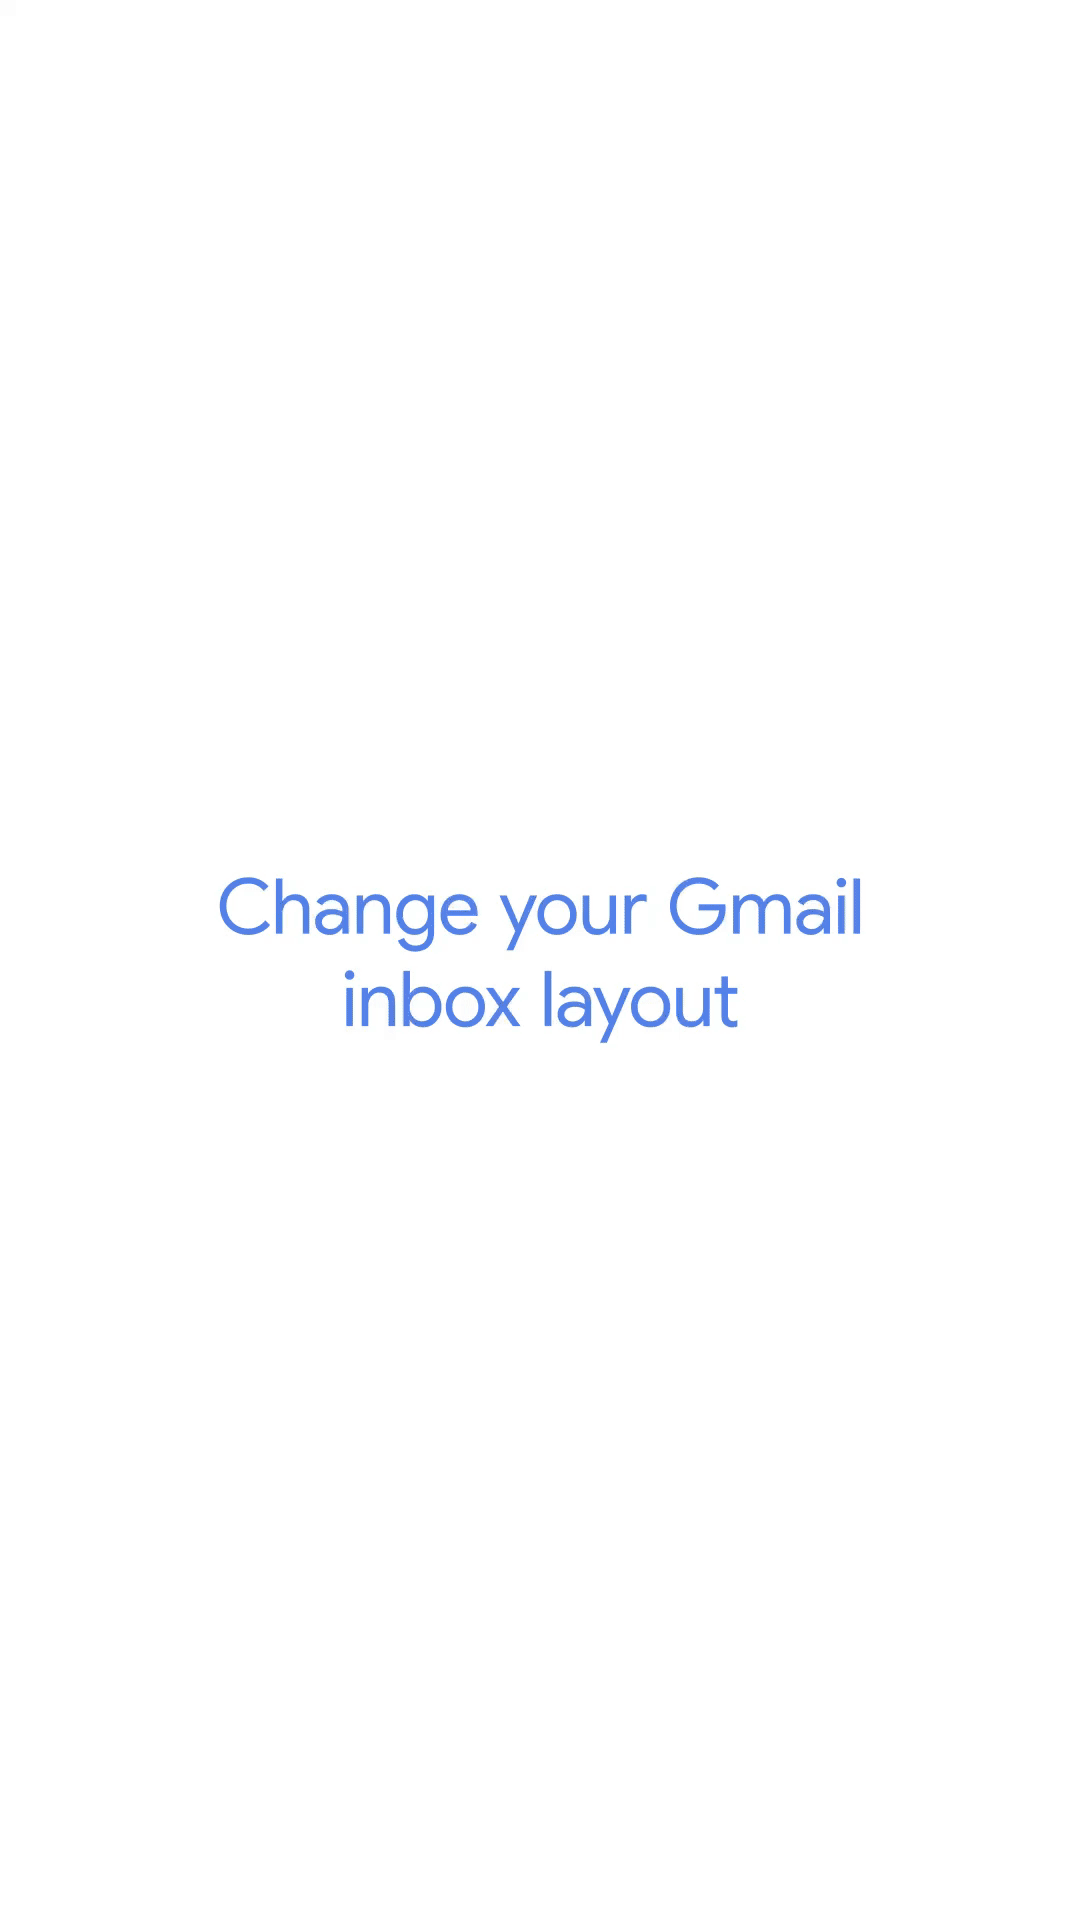 An animation showing how to change the Gmail inbox layout on iOS